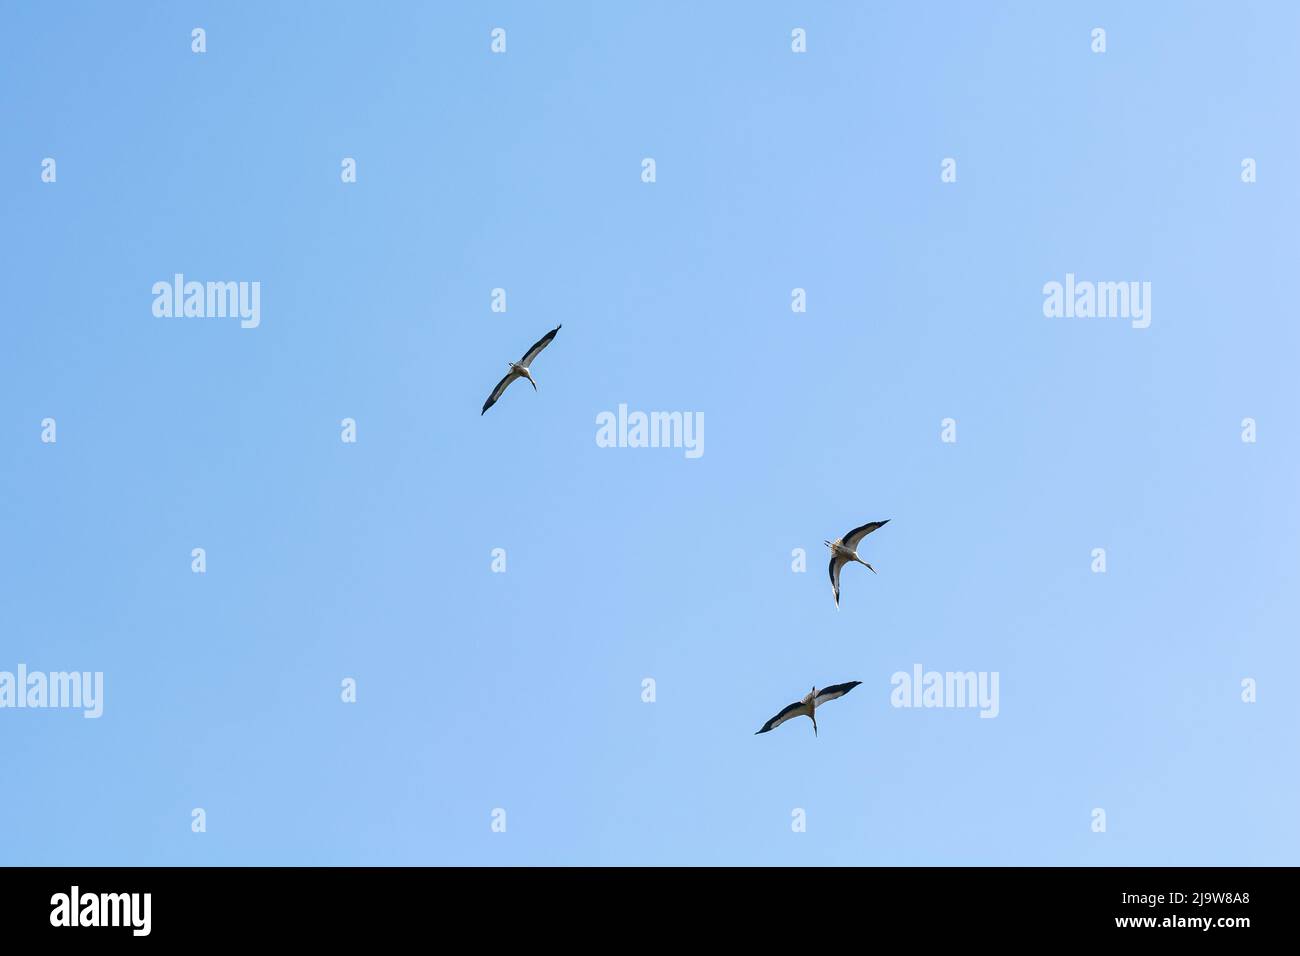 Flock of storks flying on the blue sky in Poland Stock Photo